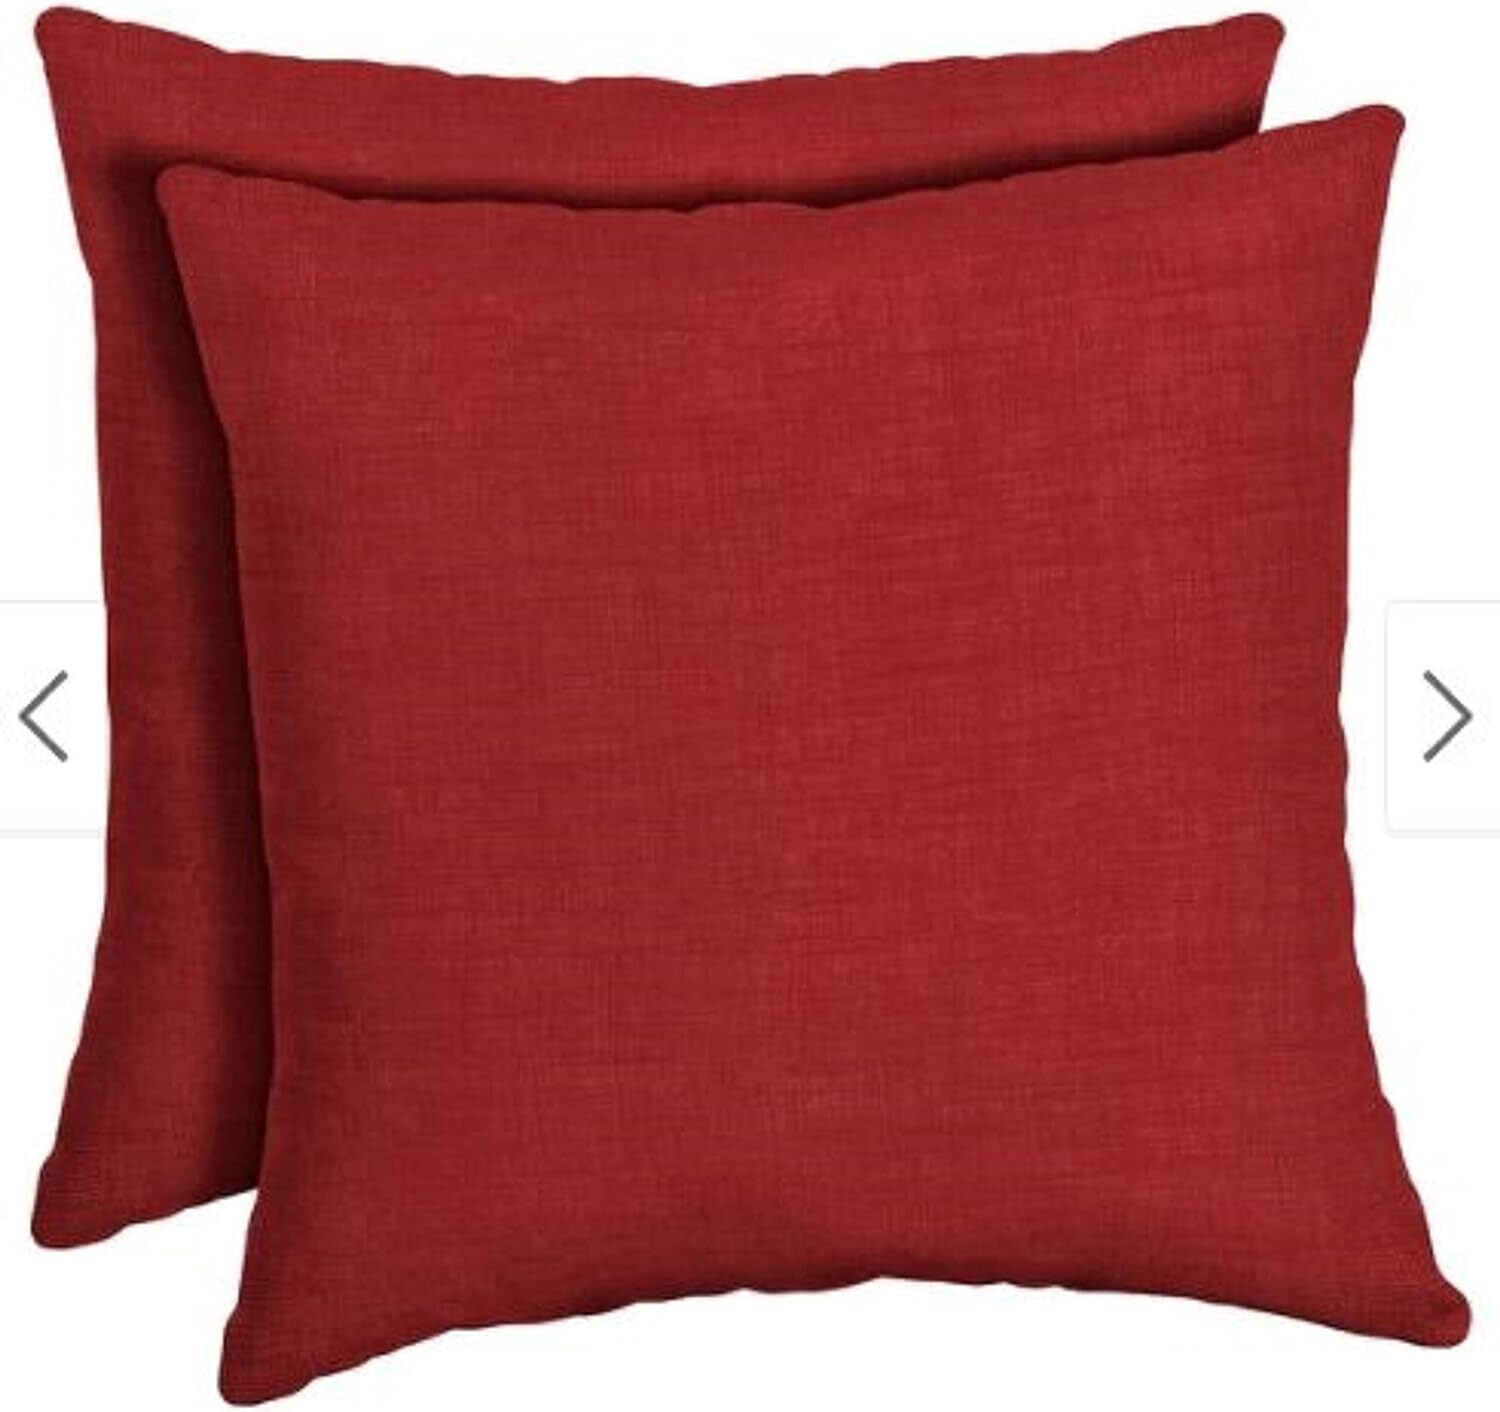 Red Brentwood Originals Outdoor Square Pillow 2-Pack 18 in x 18 in x 5 in